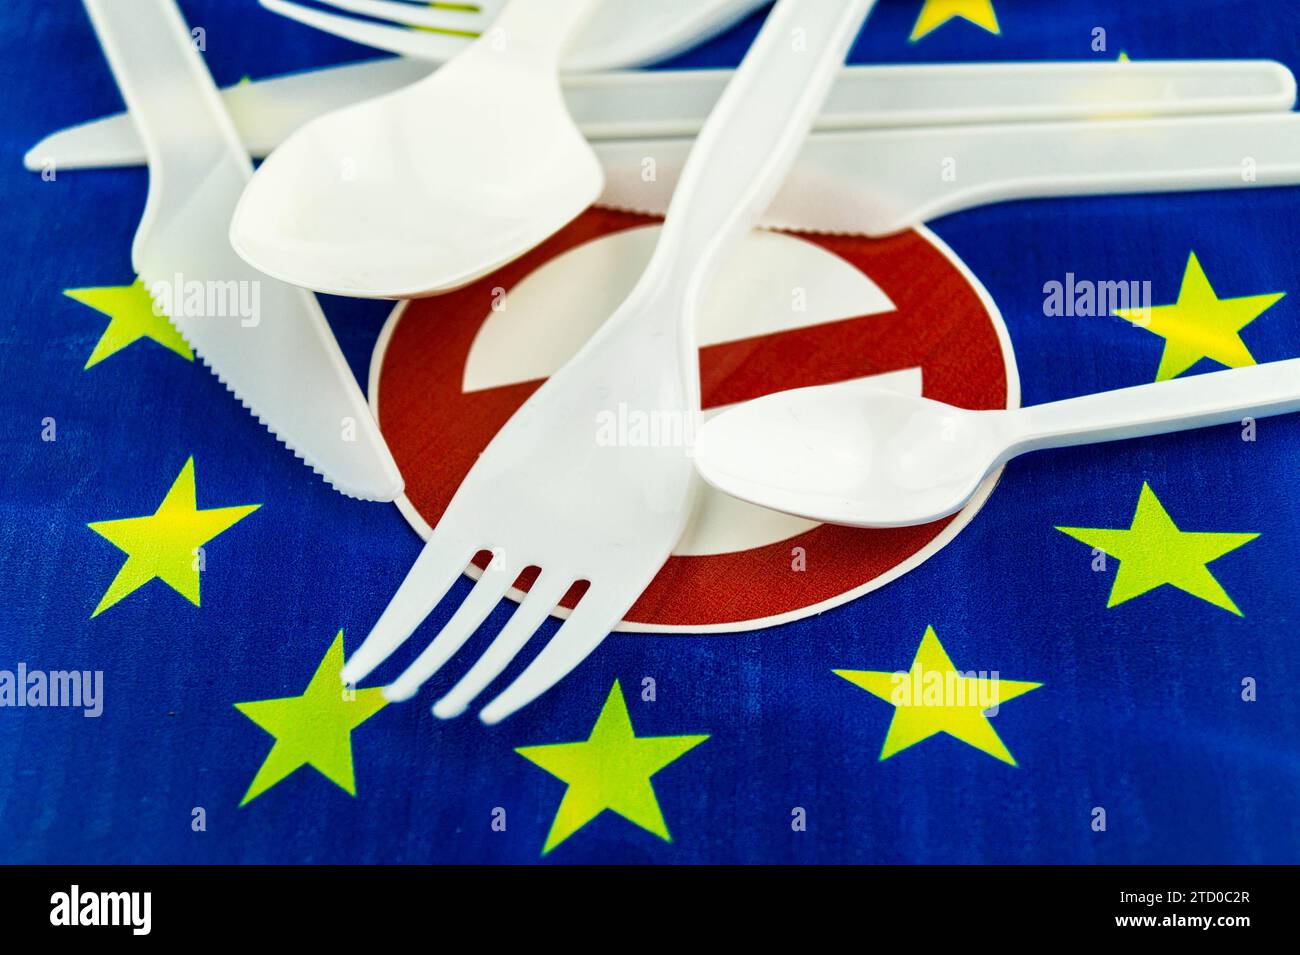 Plastic cutlery on European flag with prohibition sign, ban on plastic in the EU Stock Photo